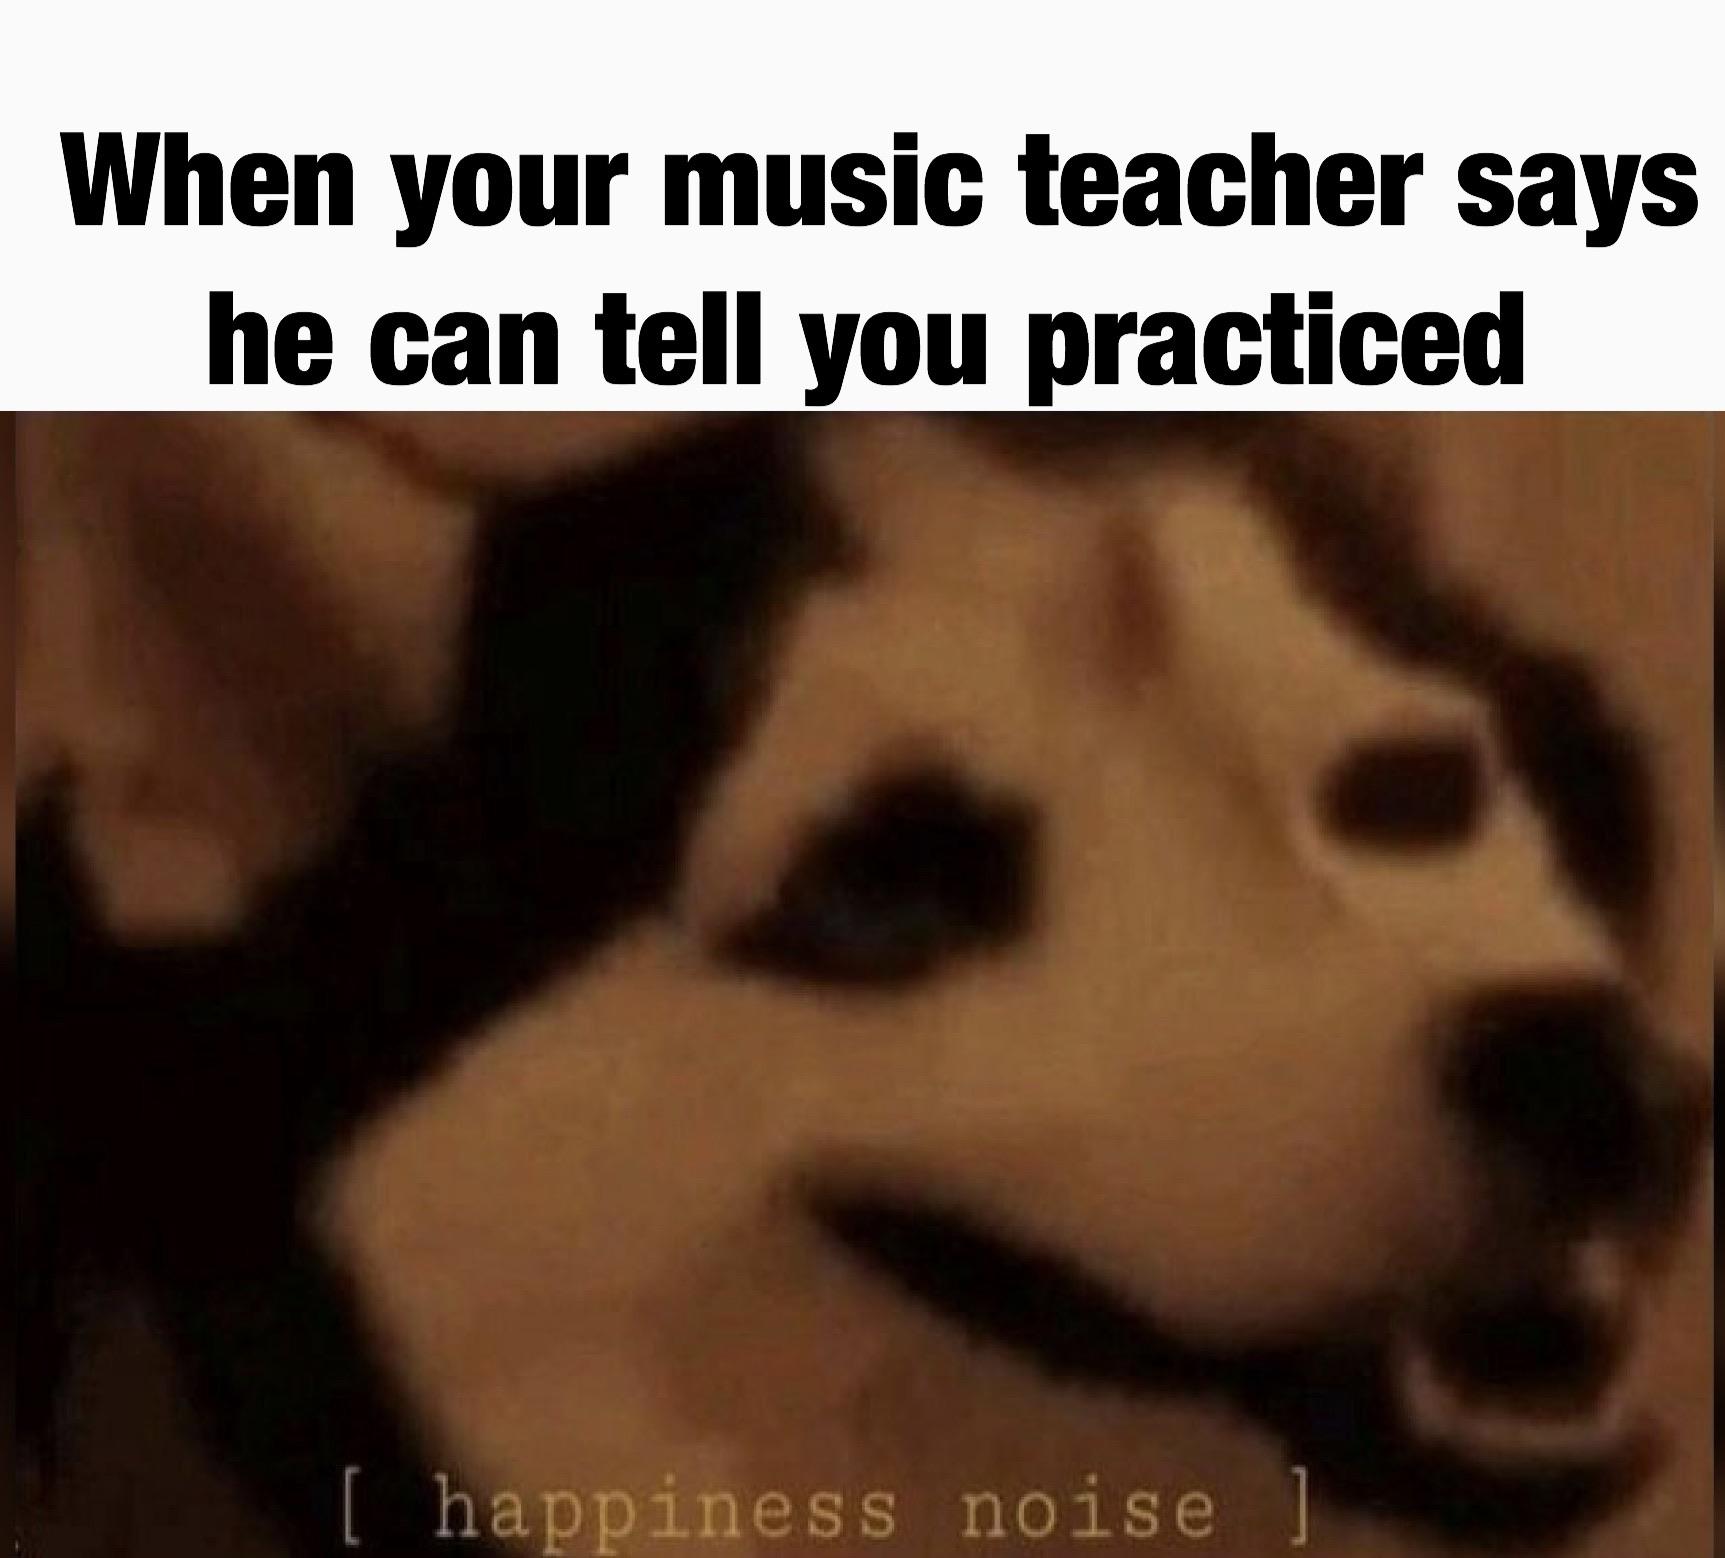 Wholesome memes,  Wholesome Memes Wholesome memes,  text: When your music teacher says he can tell you practiced [ happiness noise ] 